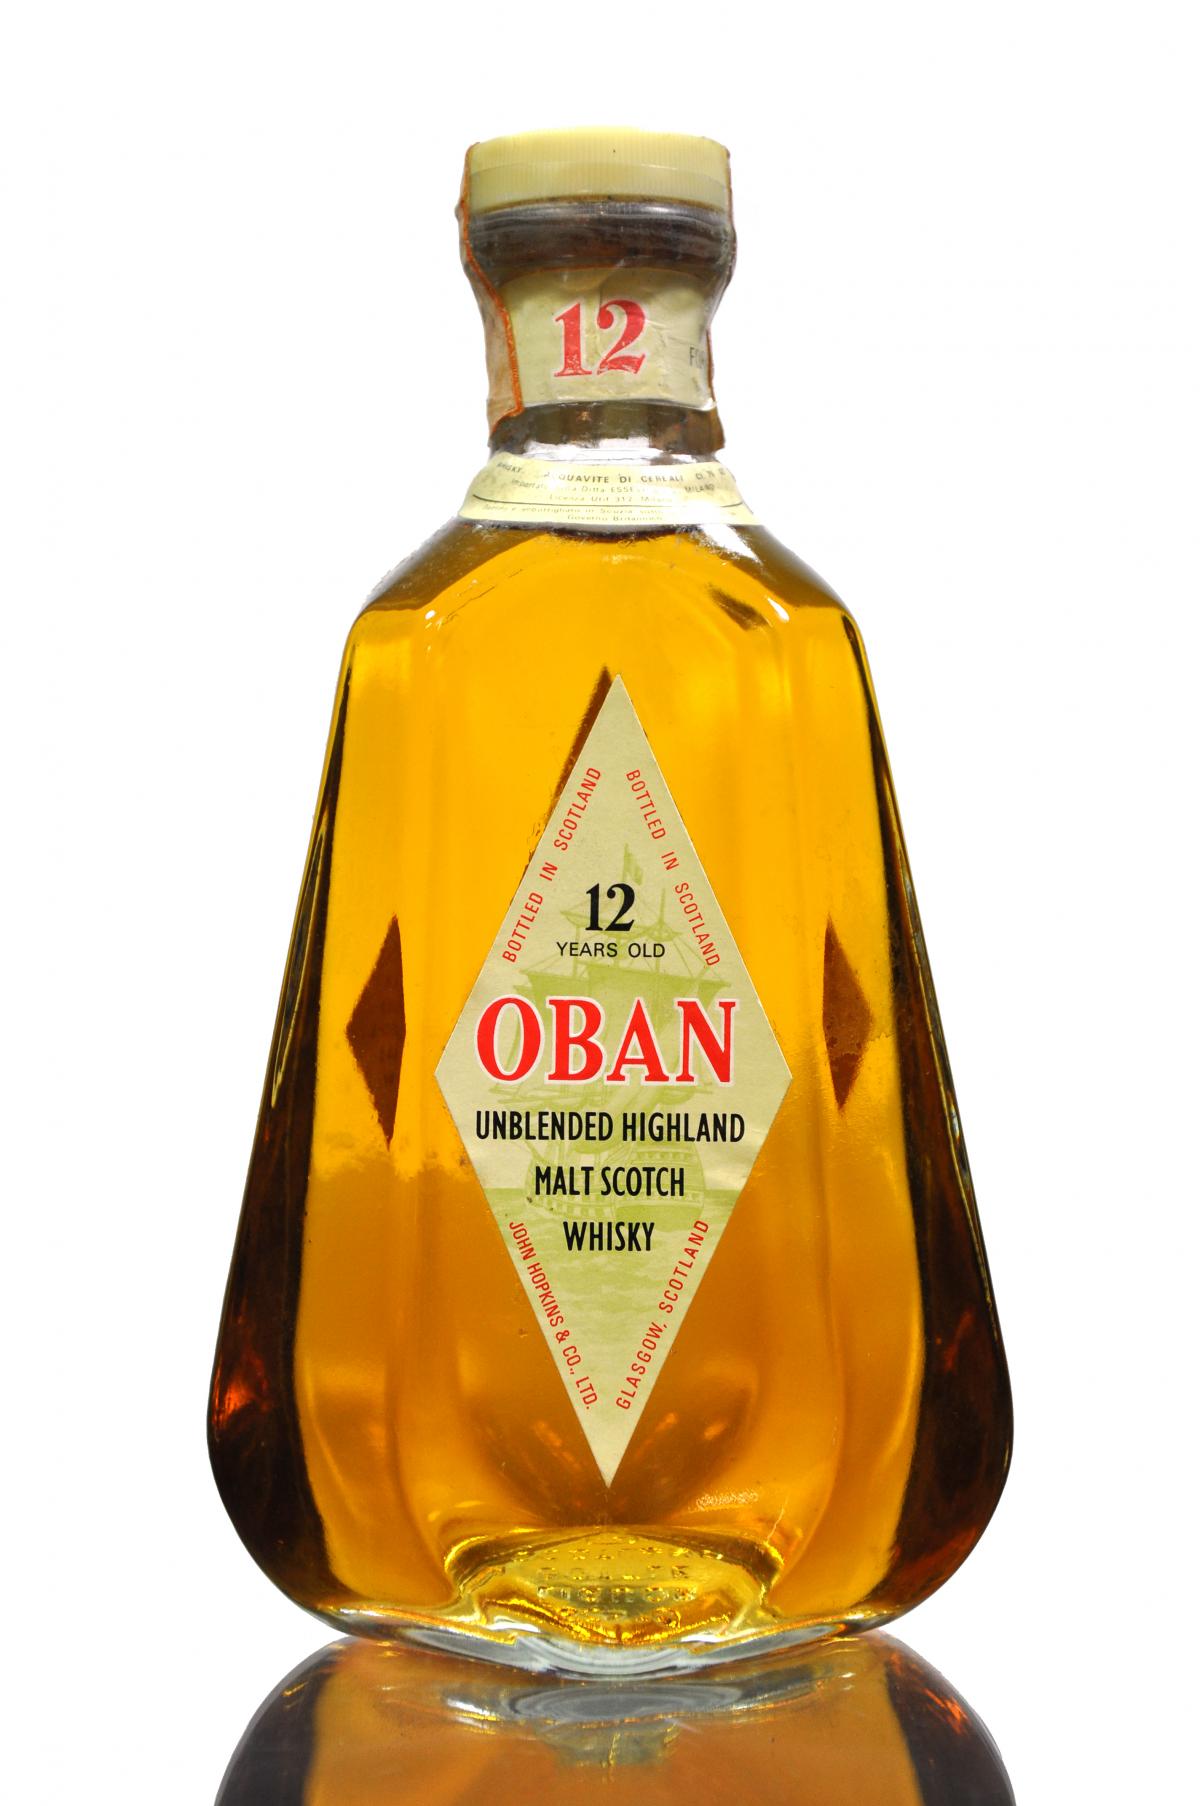 Oban 12 Year Old - Late 1970s - Italian Import